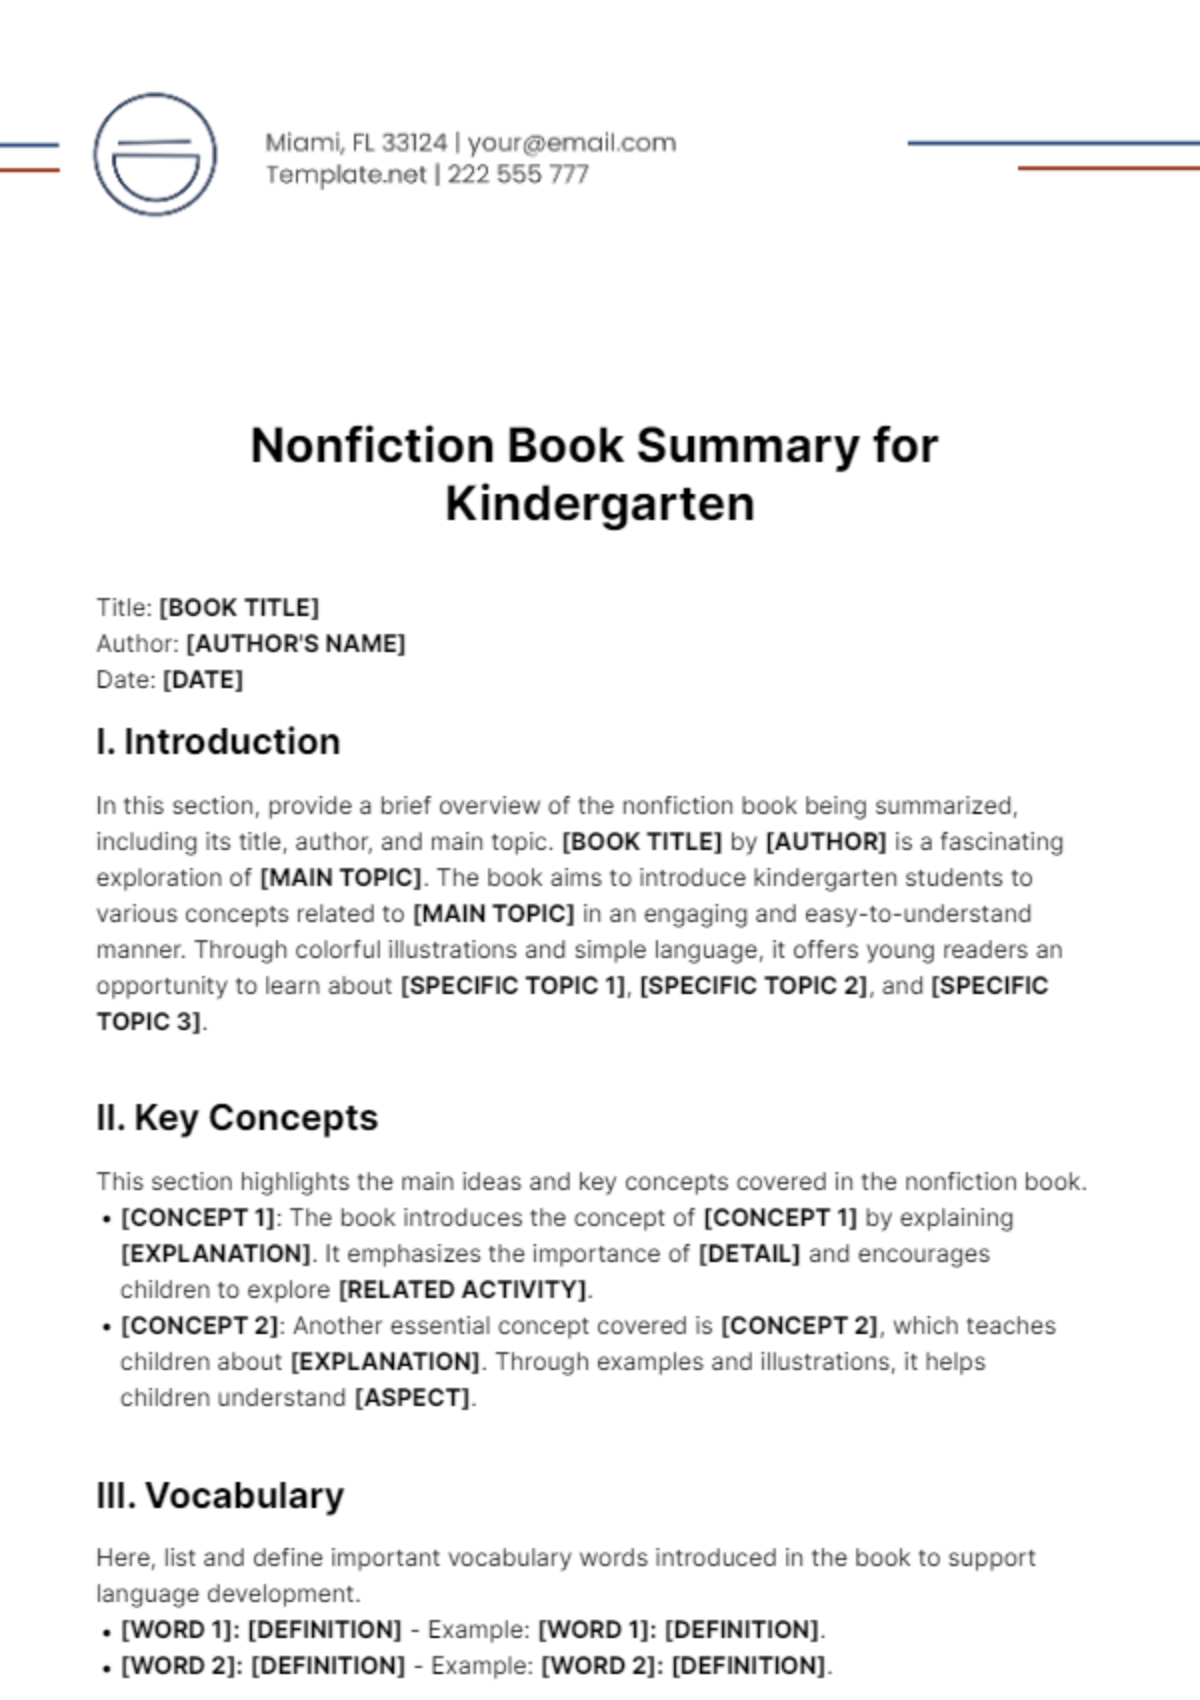 Free Nonfiction Book Summary for Kindergarten Template